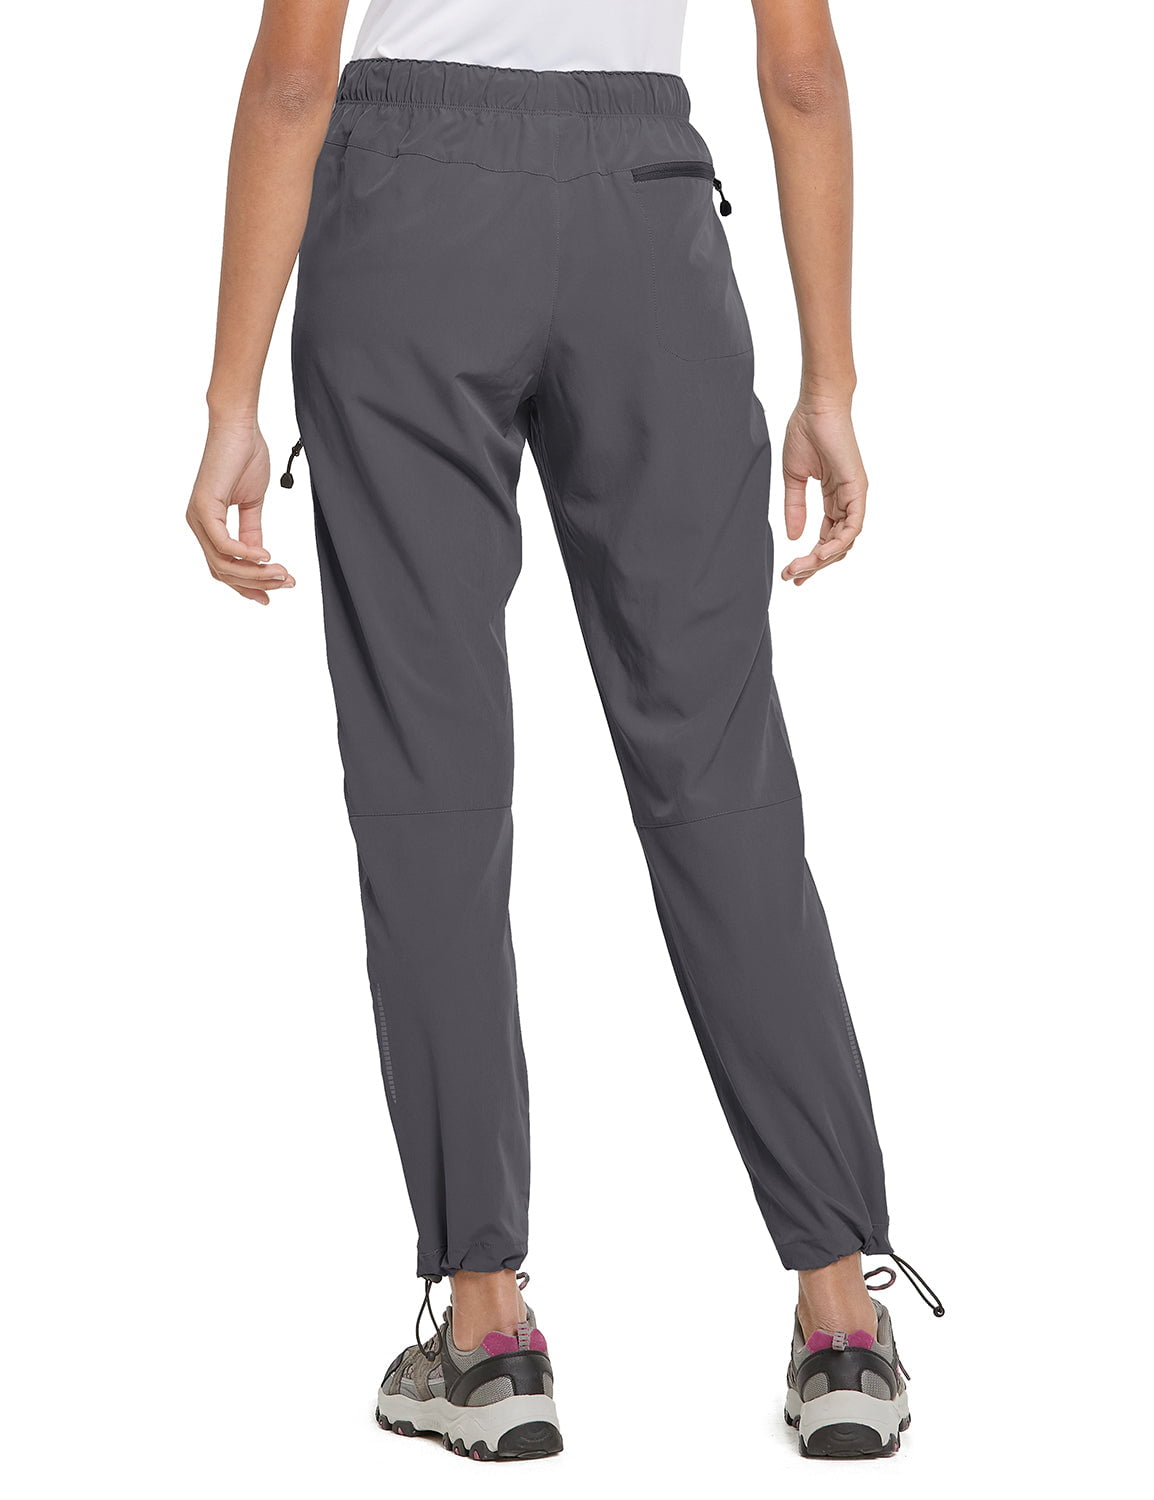 BALEAF Cargo Pants For Women Quick Dry Water Resistant With 4 Zip